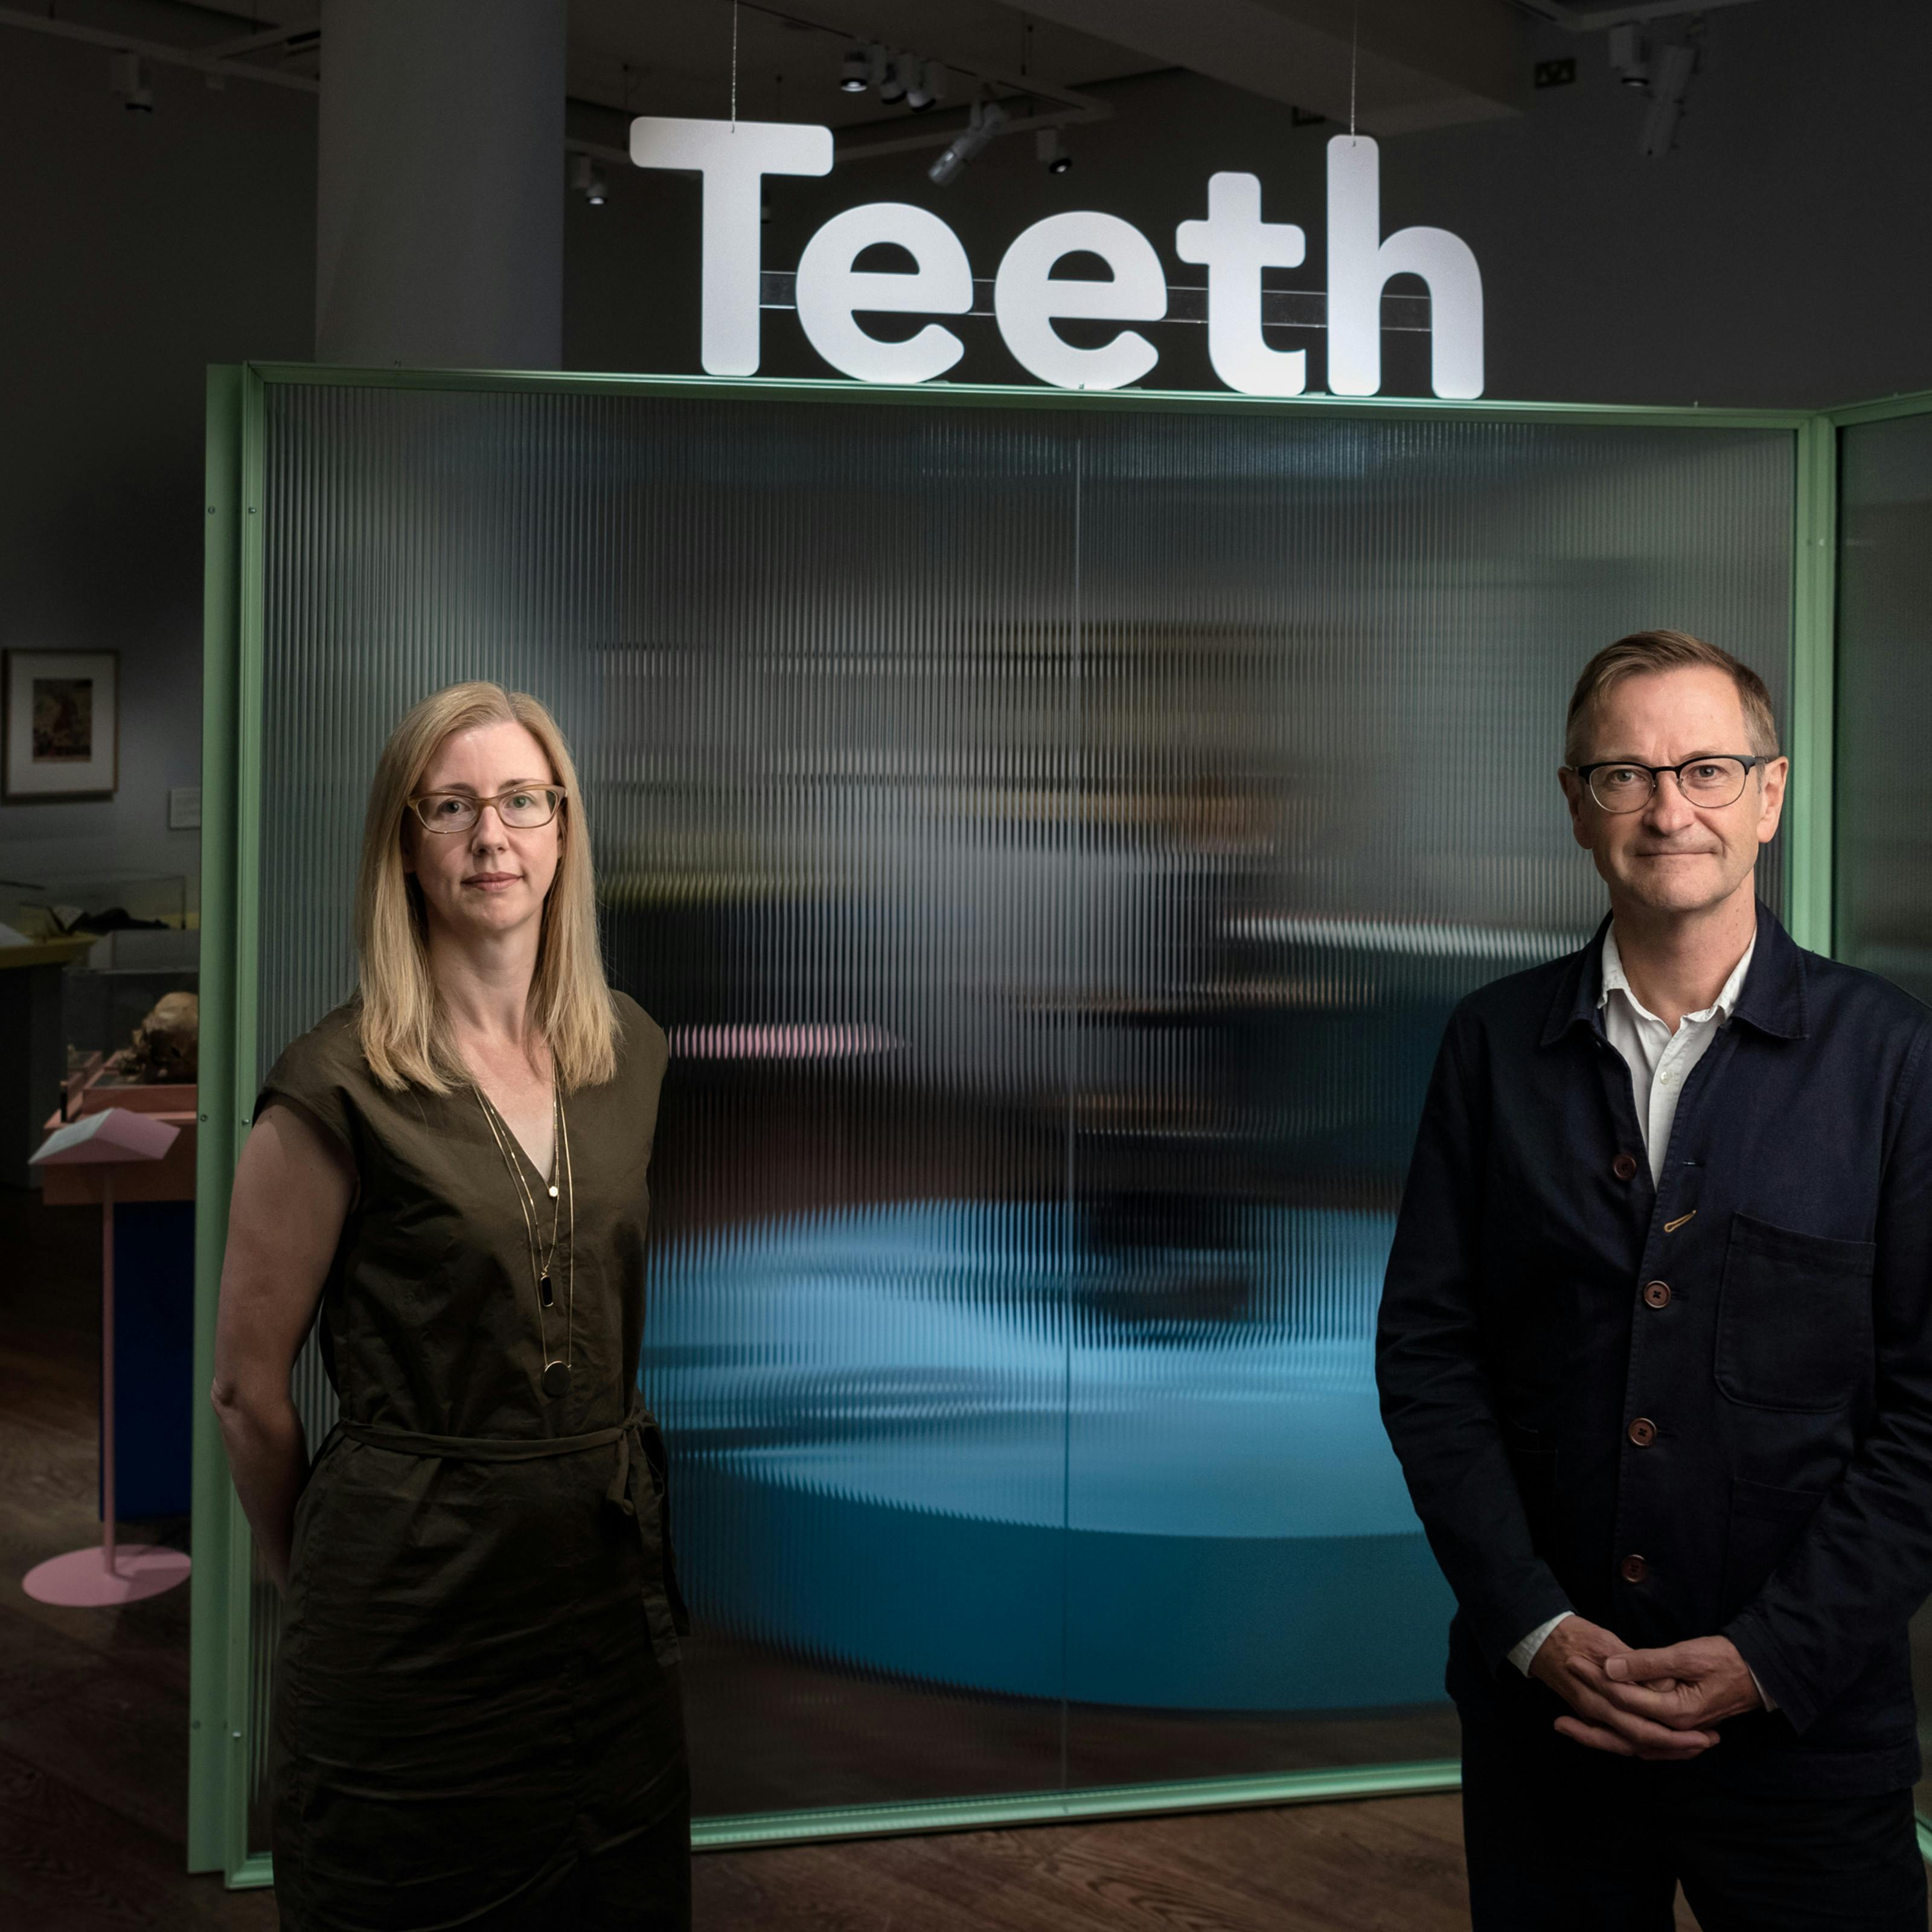 Emily Scott-Dearing and James Peto stand at the entrance to the Teeth exhibition